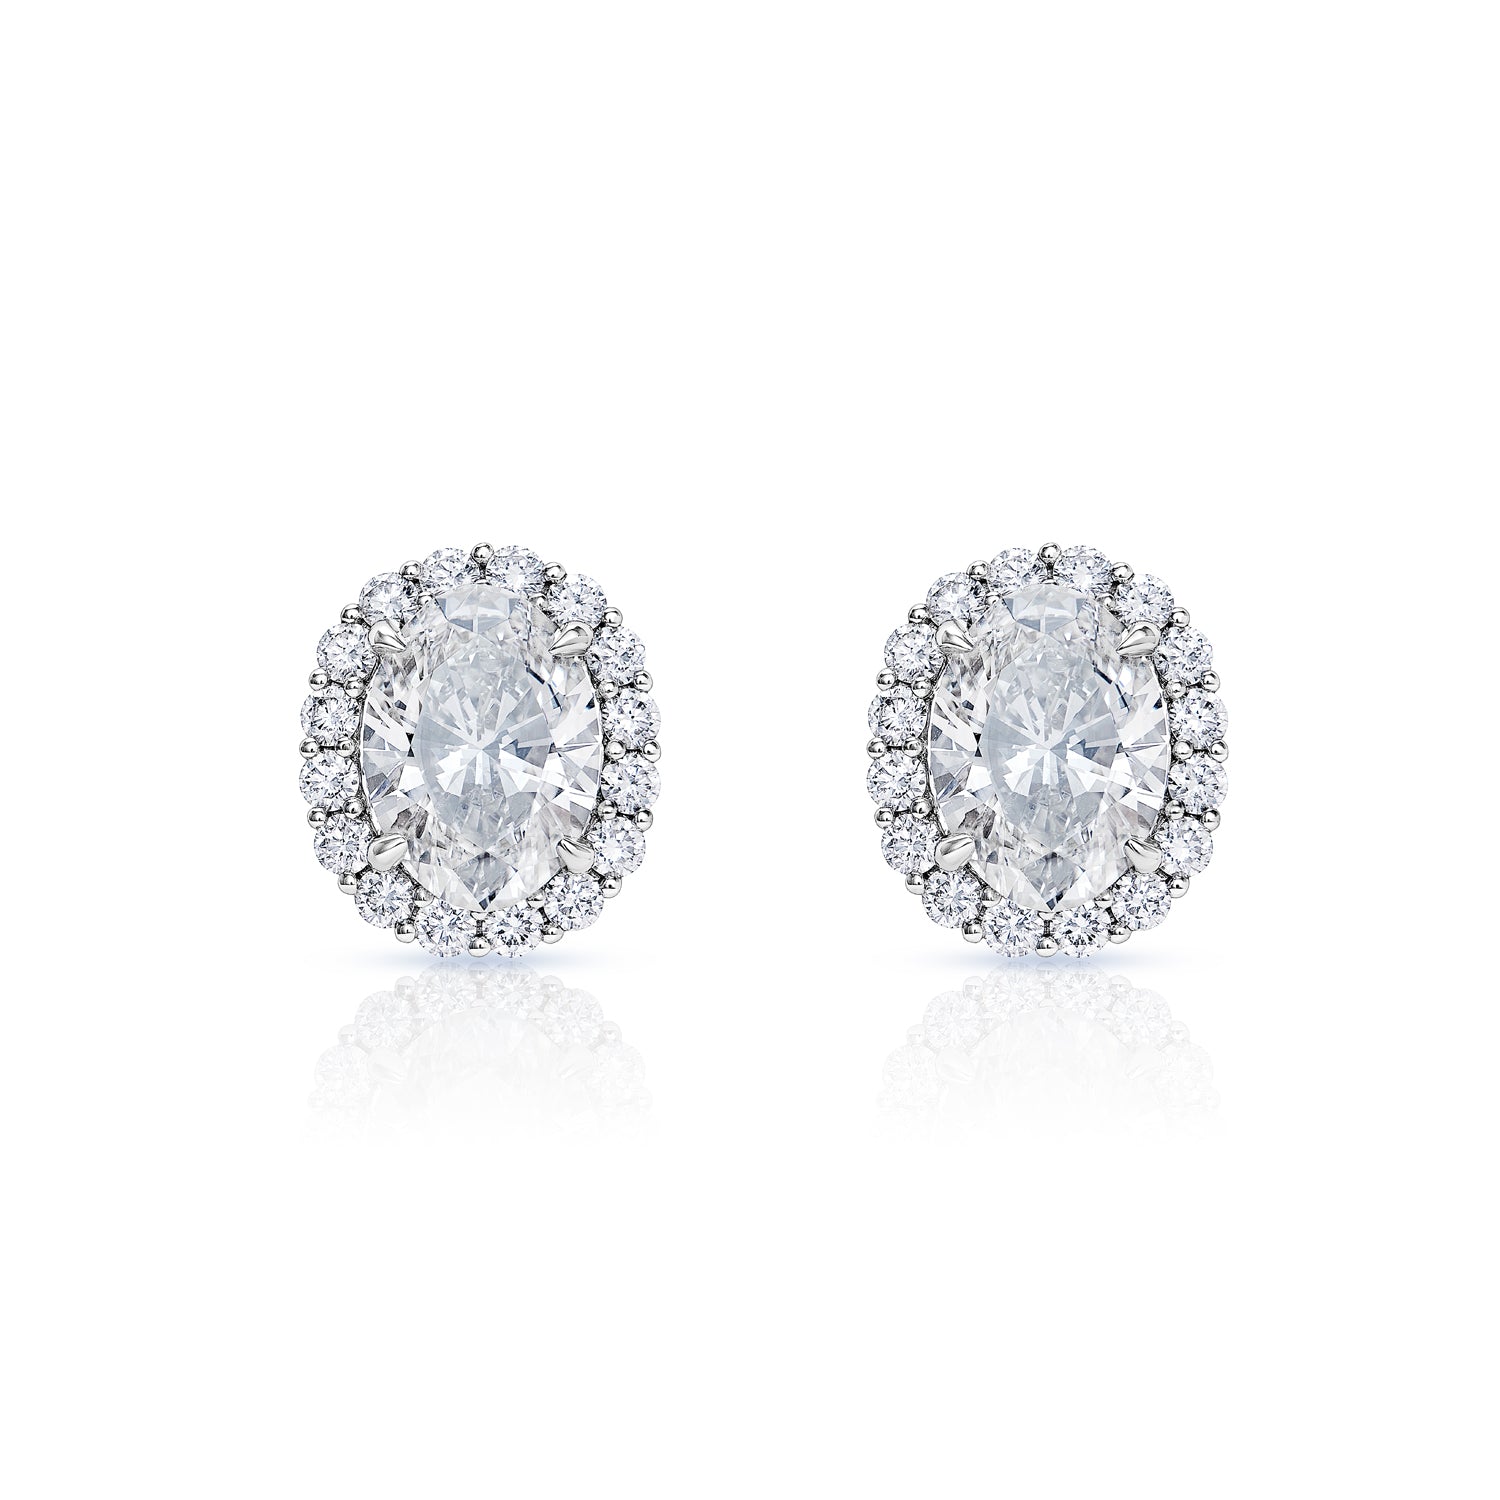 Lou 9 Carat Oval Cut SI1 Lab Grown Diamond Stud Earrings in 18k White Gold Front View